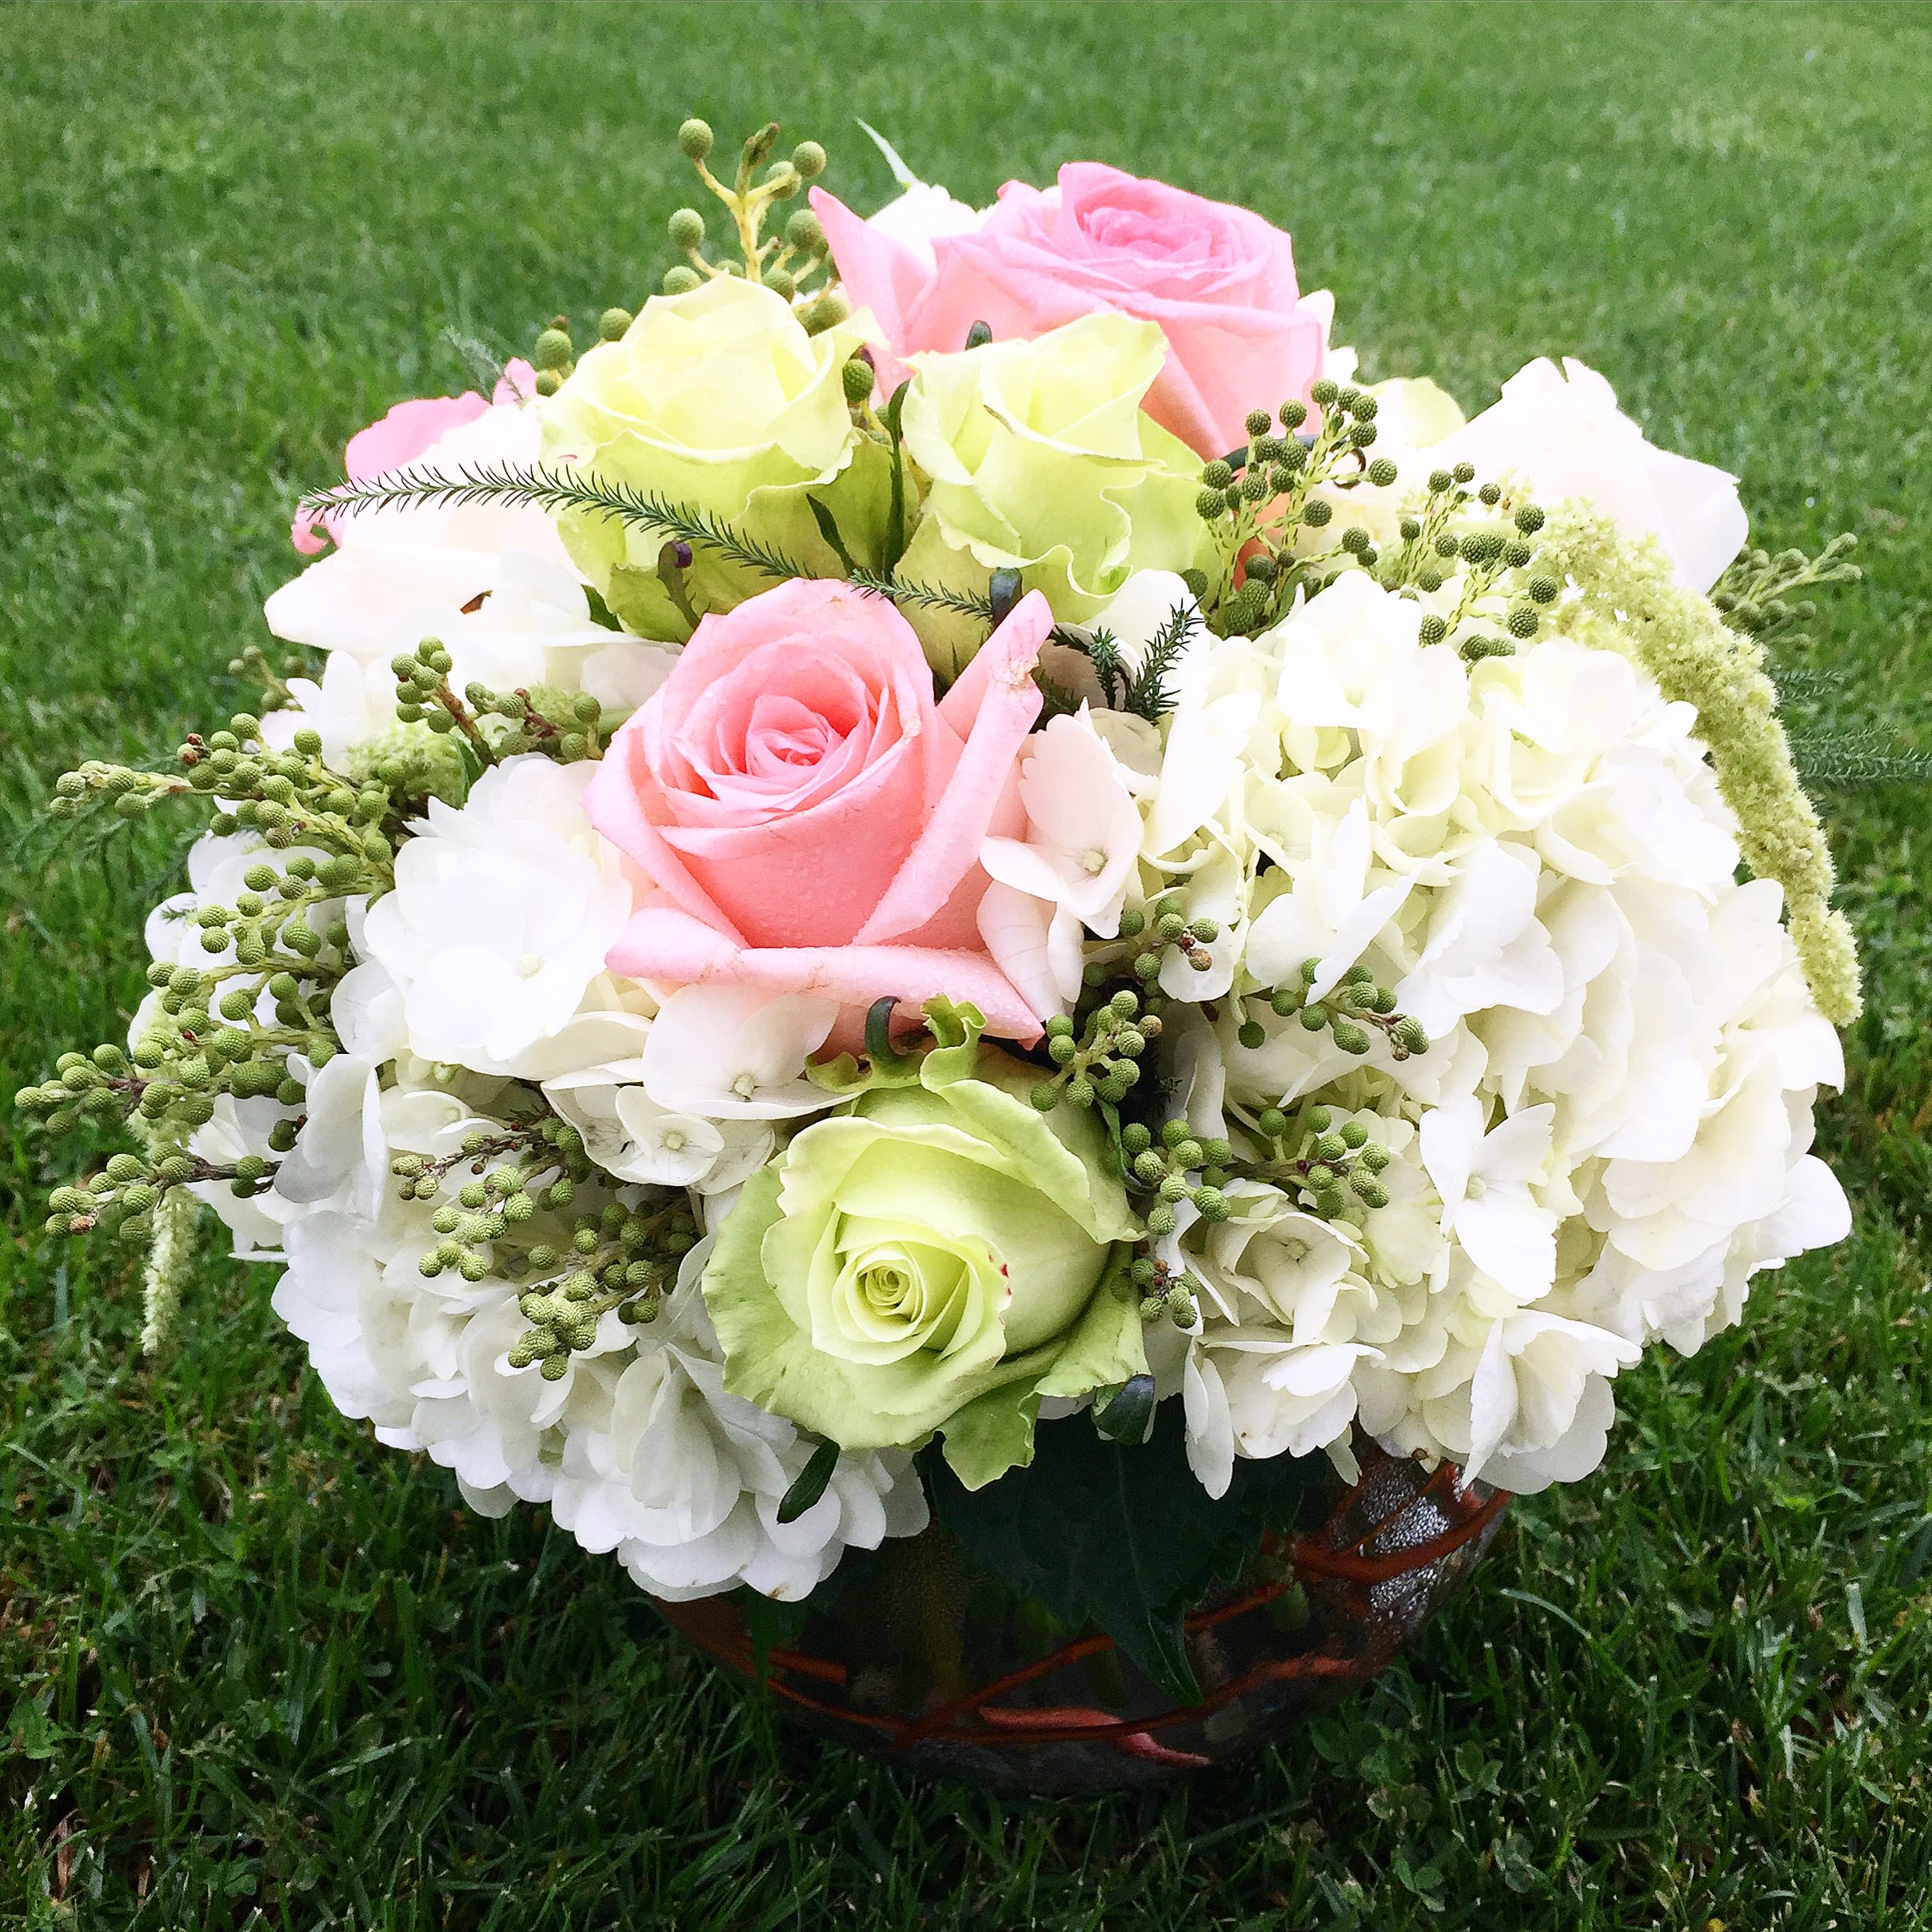 Pastel Surprise  - Surprise a loved one today by sending this fresh mix of pastel and jade roses, hydrangeas and brazilian elegantly arranged in a keepsake glass bubble vase.  Whether to say hello, thank you, missing you, congratulations or just because...this roundy moundy bouquet will become a memory to be cherished forever!  Approximately 10&quot; D